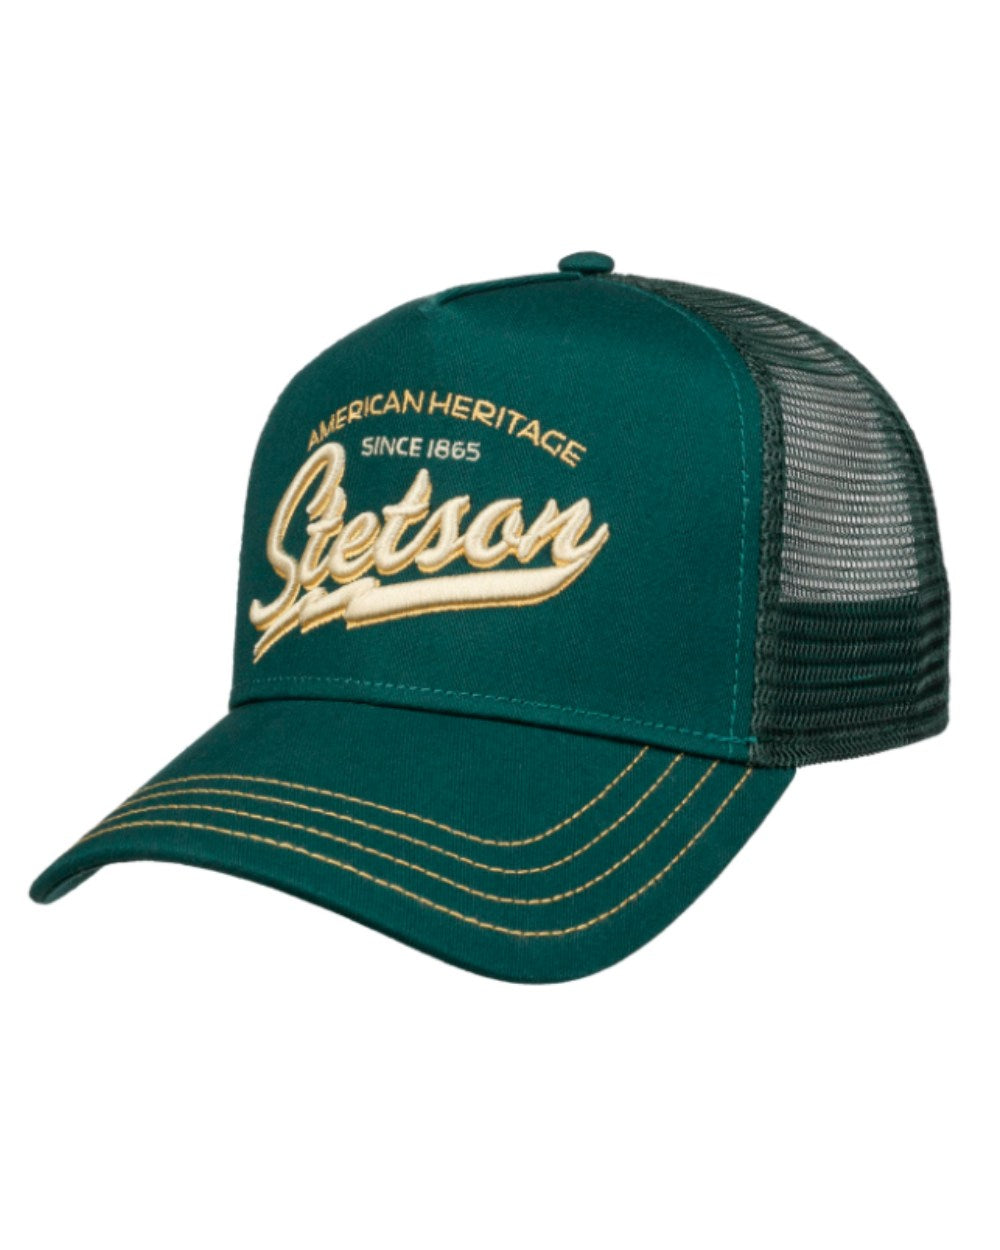 Dark Forest coloured Stetson American Heritage Classic Trucker Cap on White background 